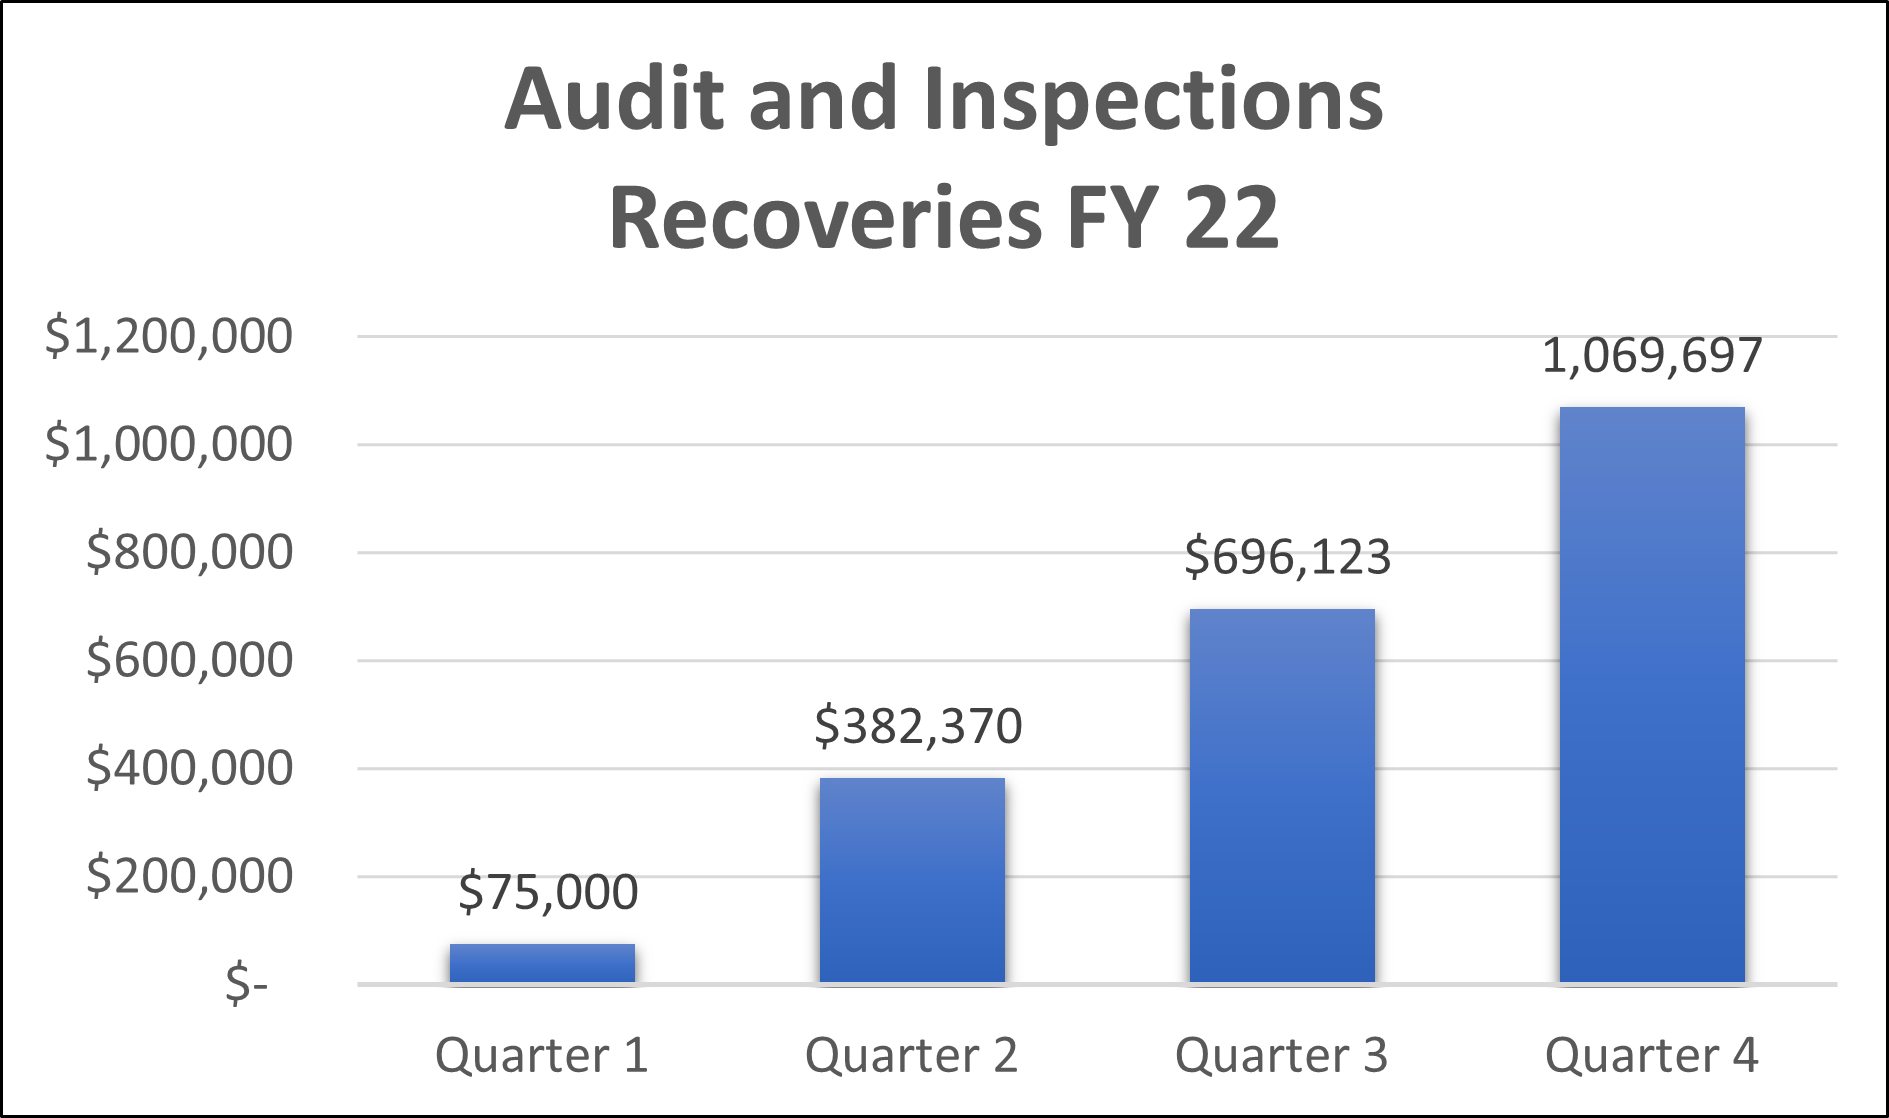 Audit recoveries